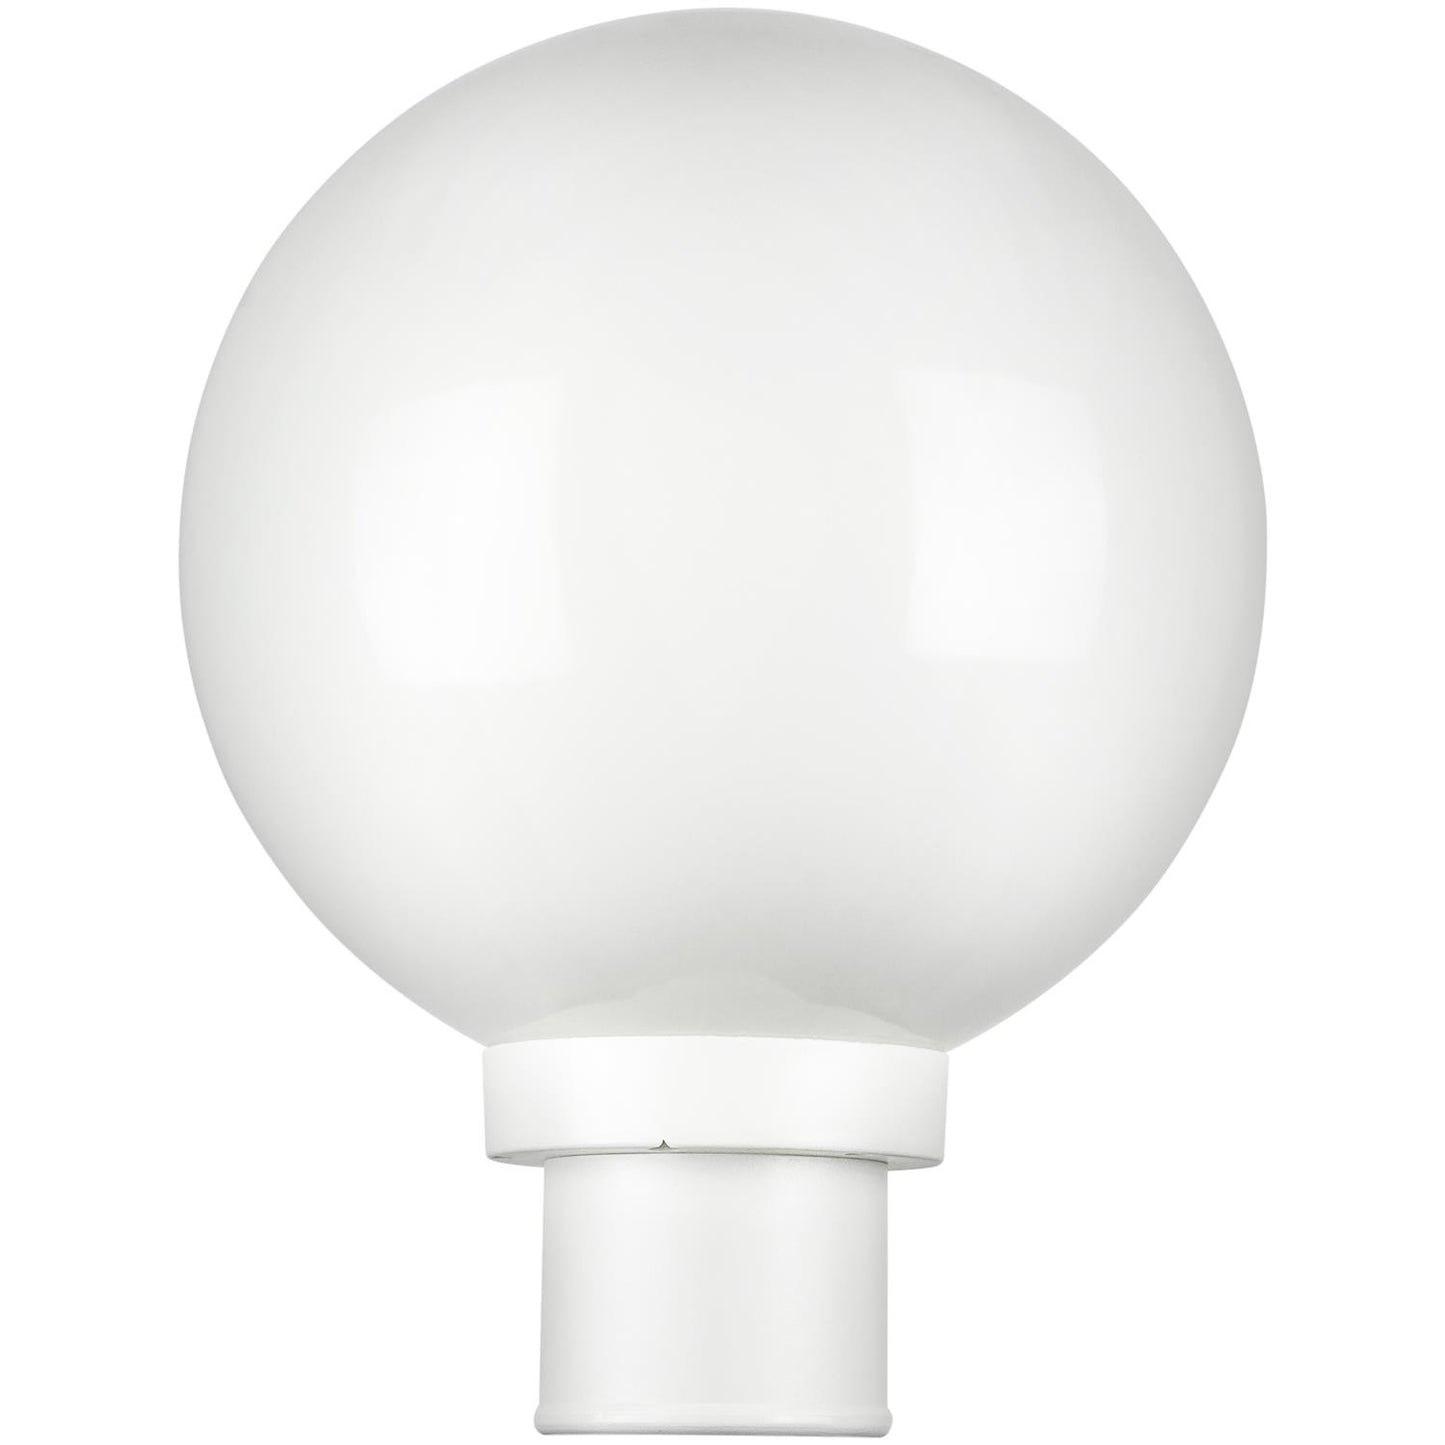 Sunlite 10" Decorative Outdoor Twist Lock Globe Polycarbonate Post Fixture, White Finish, White Lens, 3" Post Mount (not included)